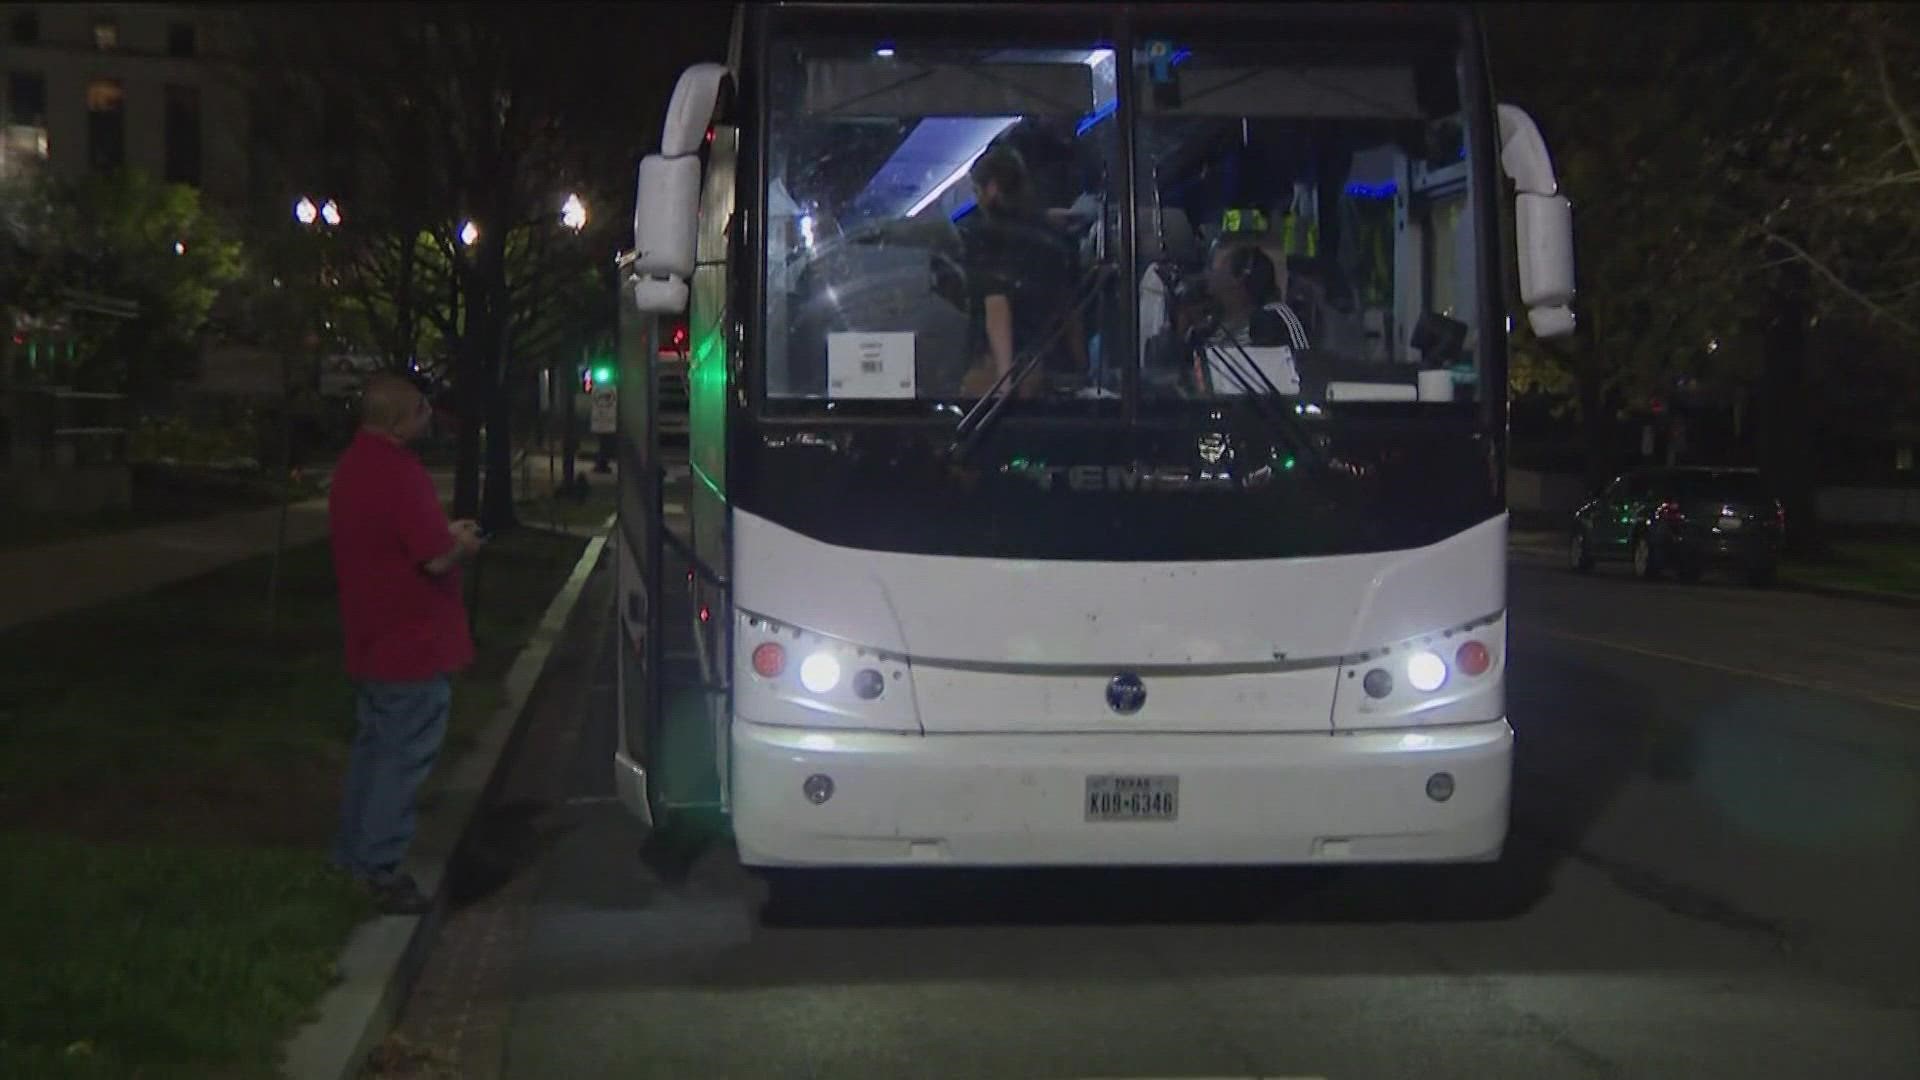 Gov. Abbott has sent thousands of migrants by bus to D.C. in defiance of Biden's pledge to lift Title 42.